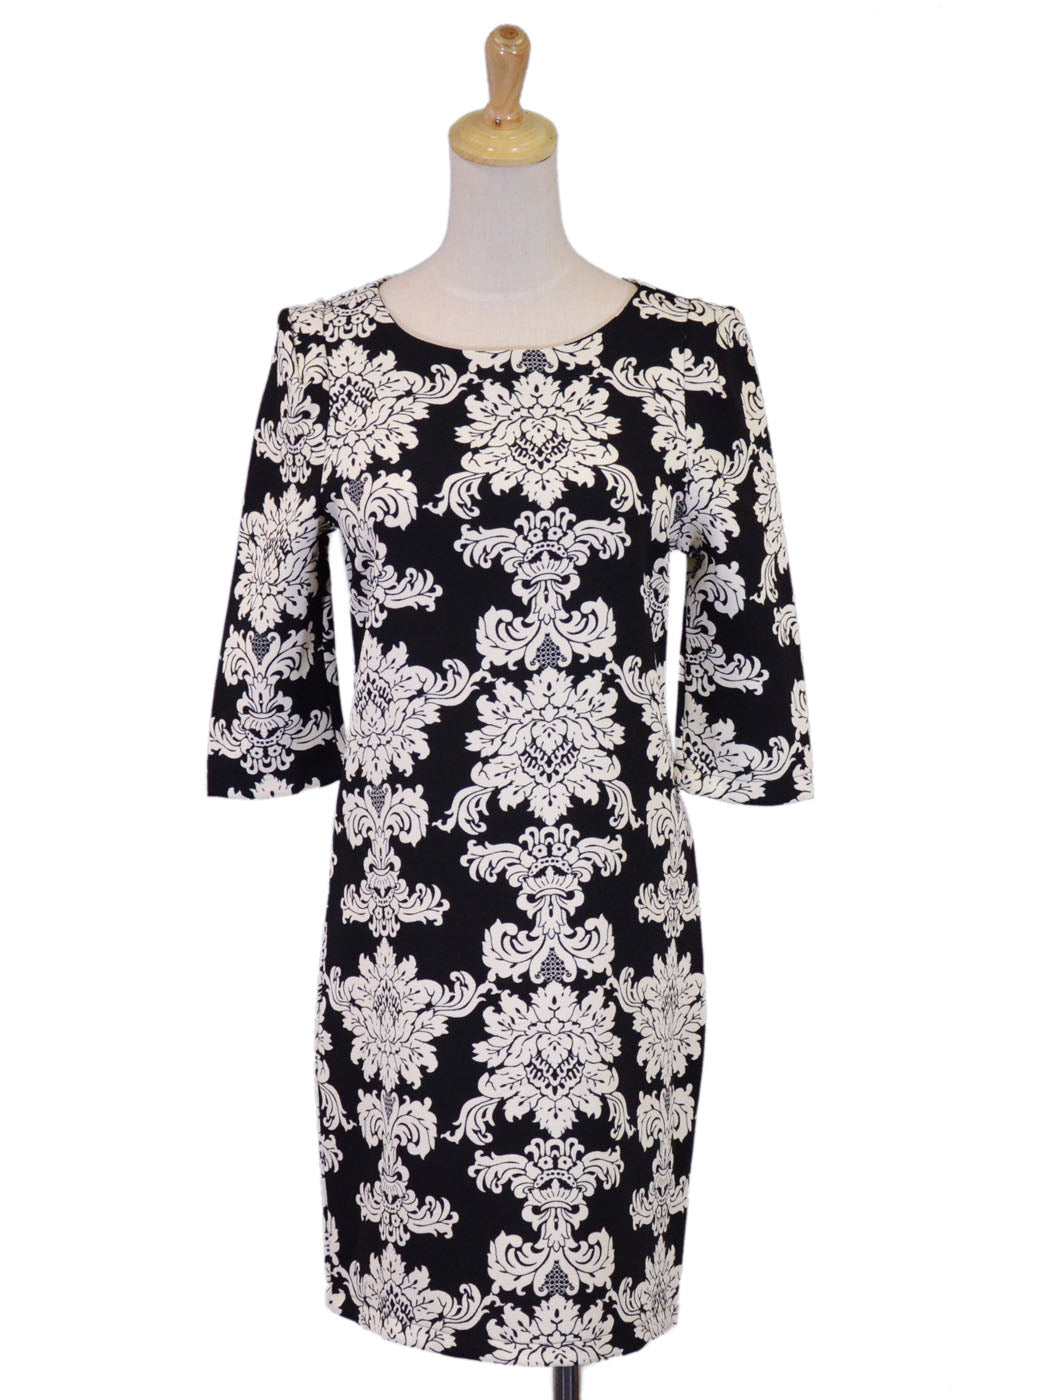 Everly Classic Black And White Damask Printed Three Quarter Sleeved Dress - ALILANG.COM